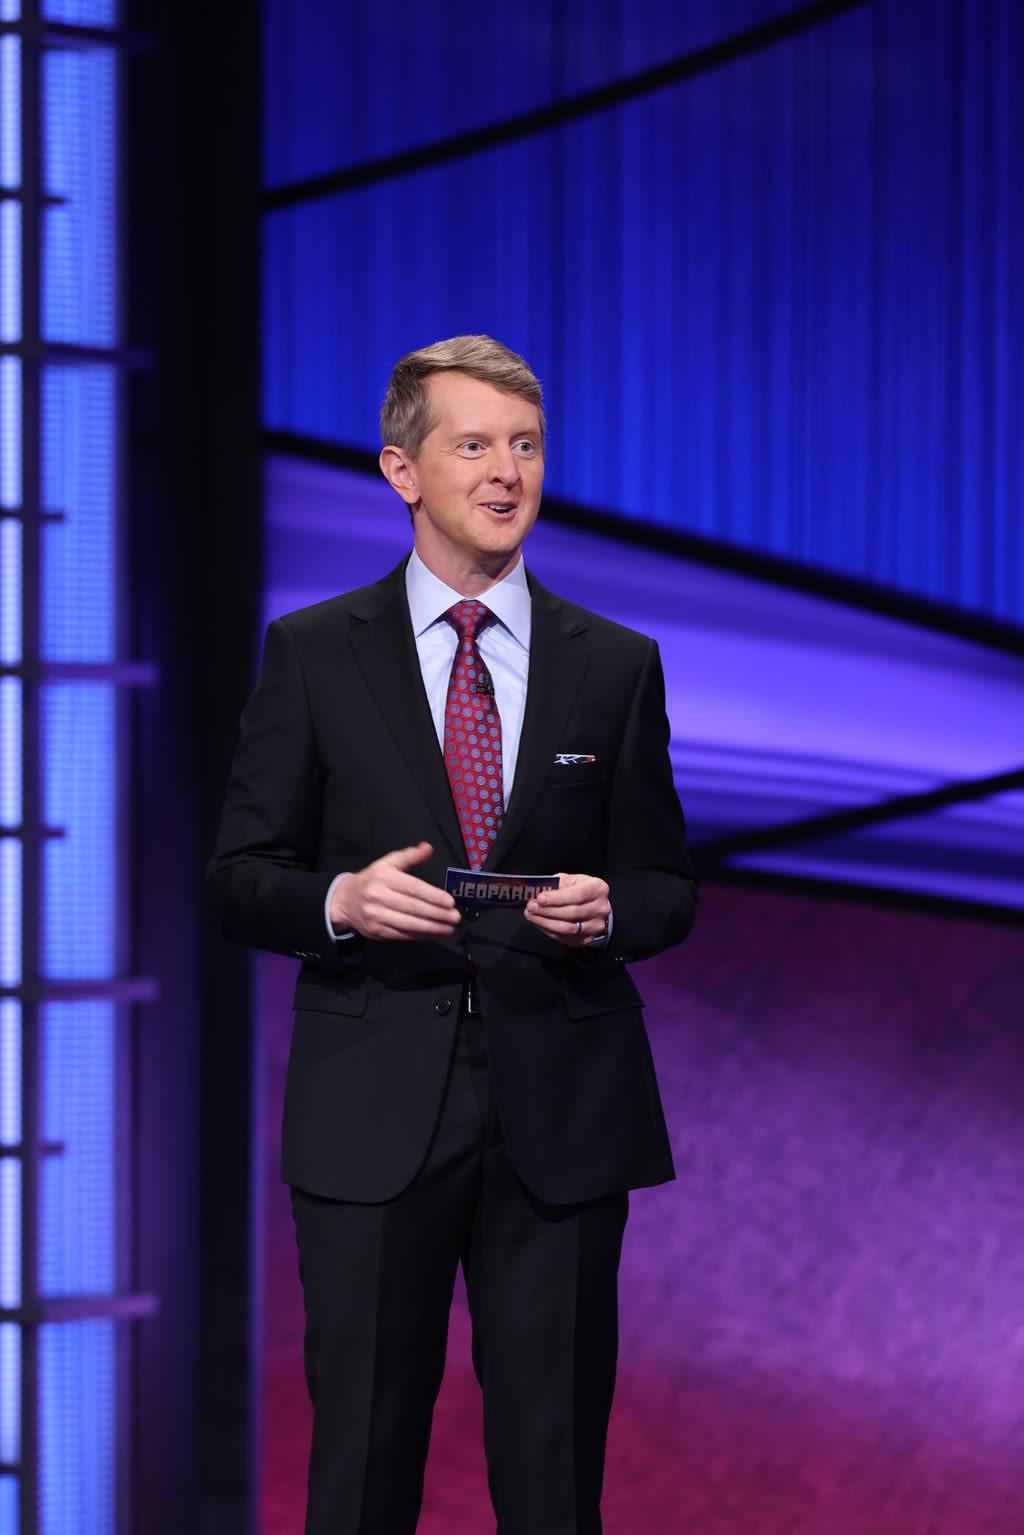 TV Q&A: What’s the policy for sitting on ‘Jeopardy?’